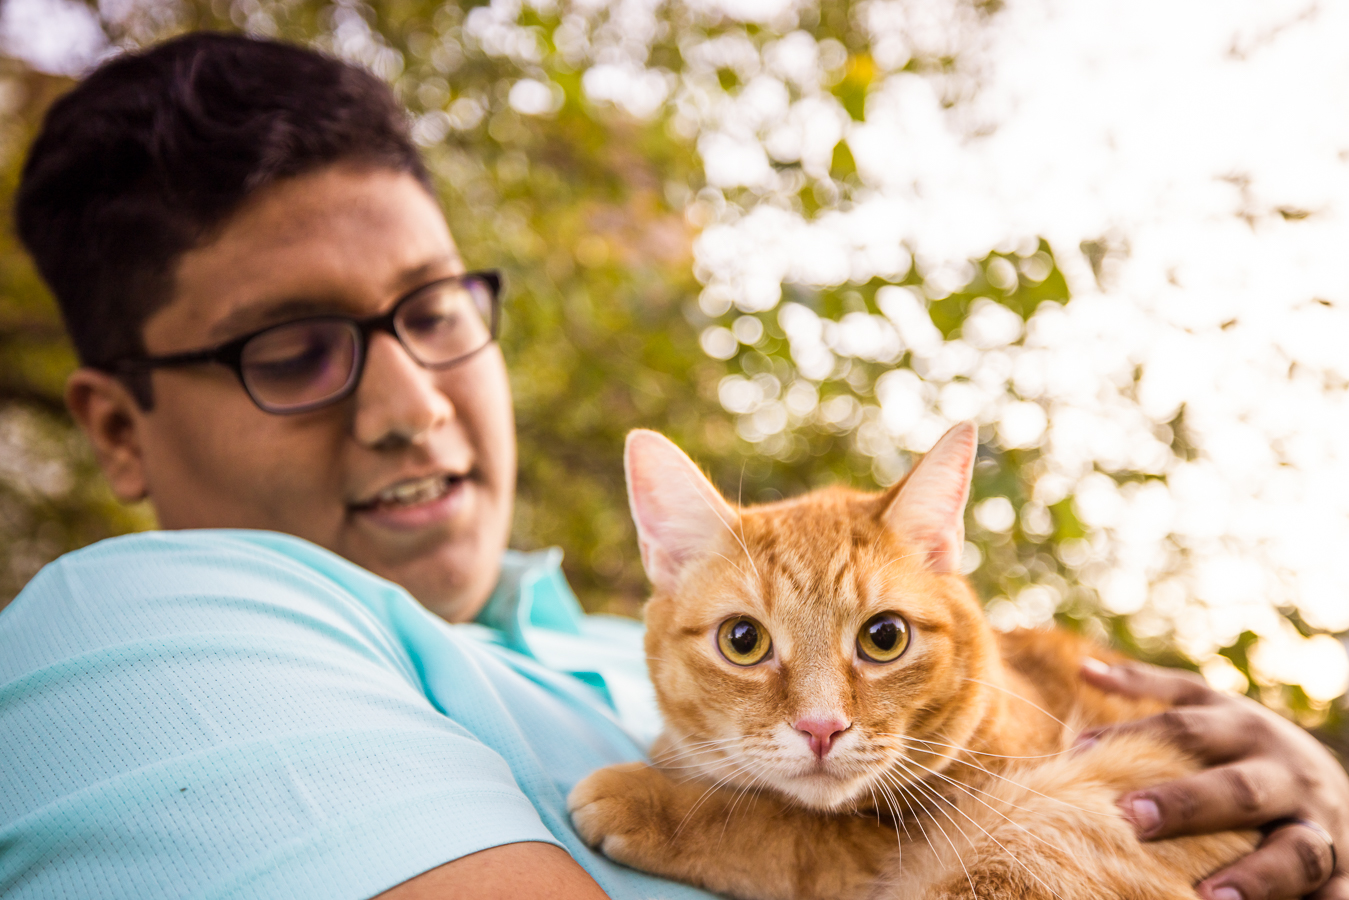 animal family portrait photographer, lisa rhinehart, captures this image of the groom as he holds the couples orange cat for a family photo 